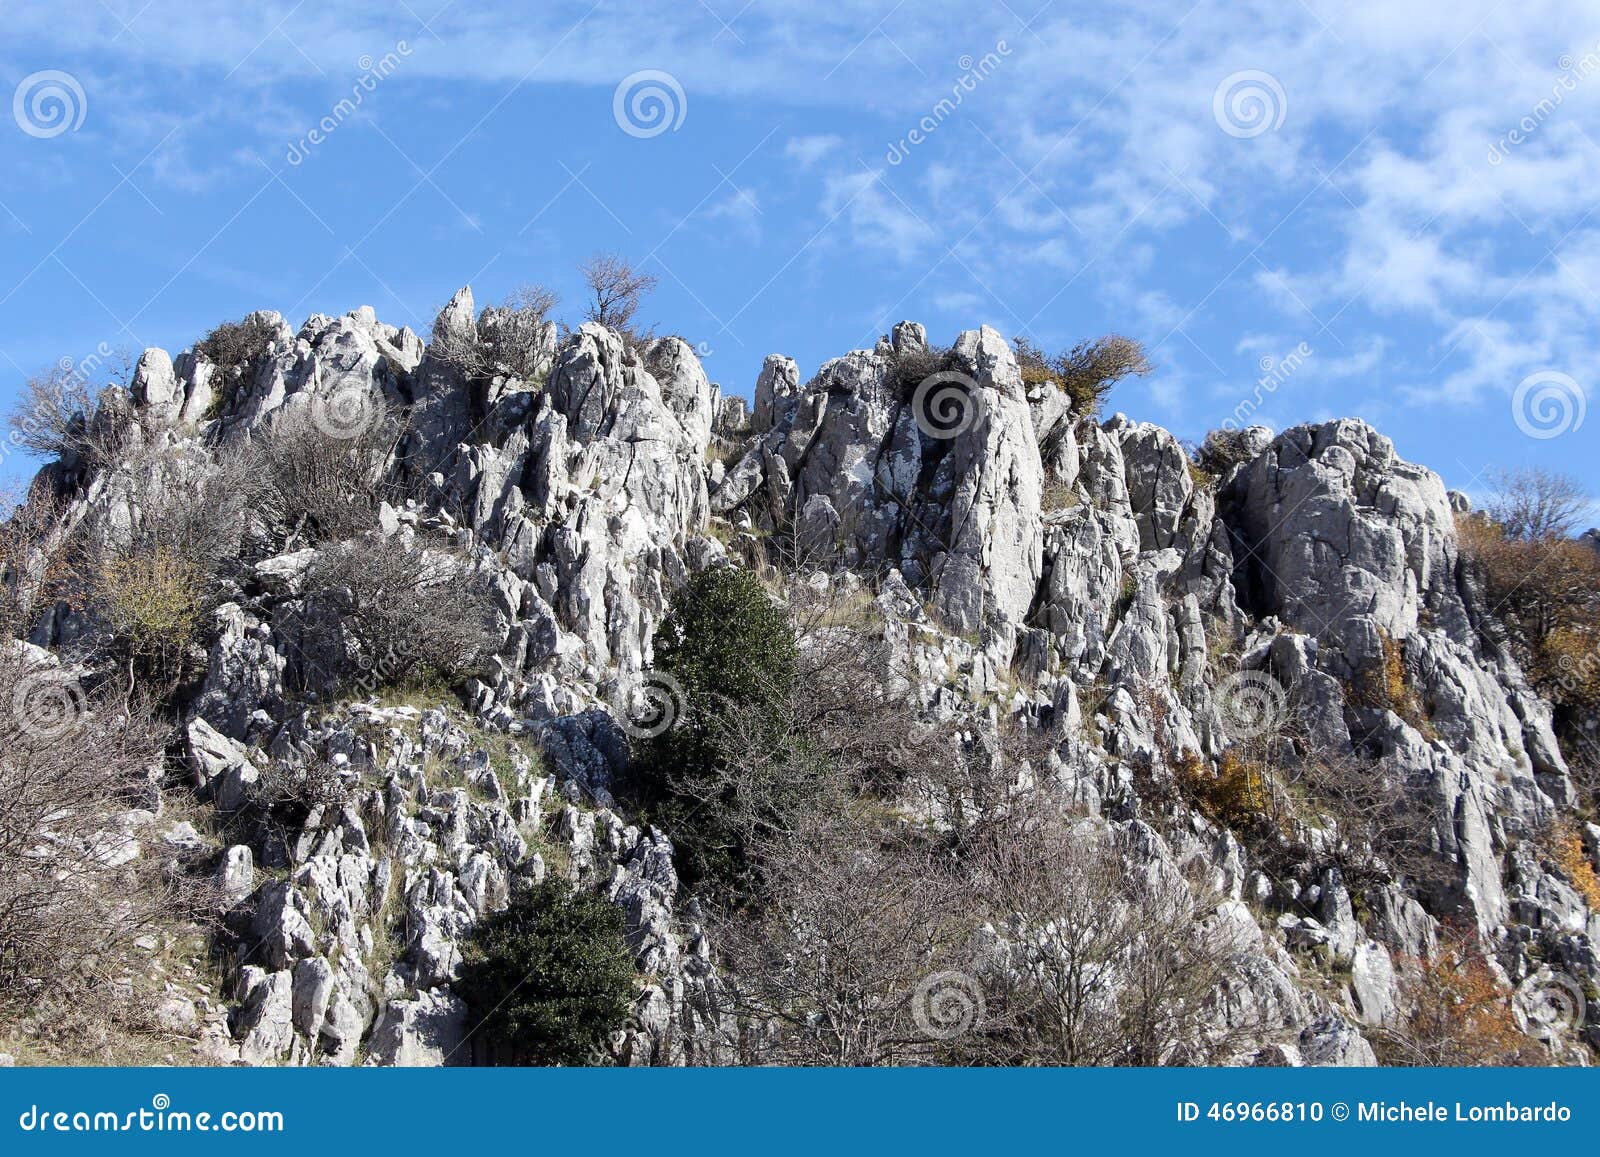 rock outcroppings in autumn, sunny day